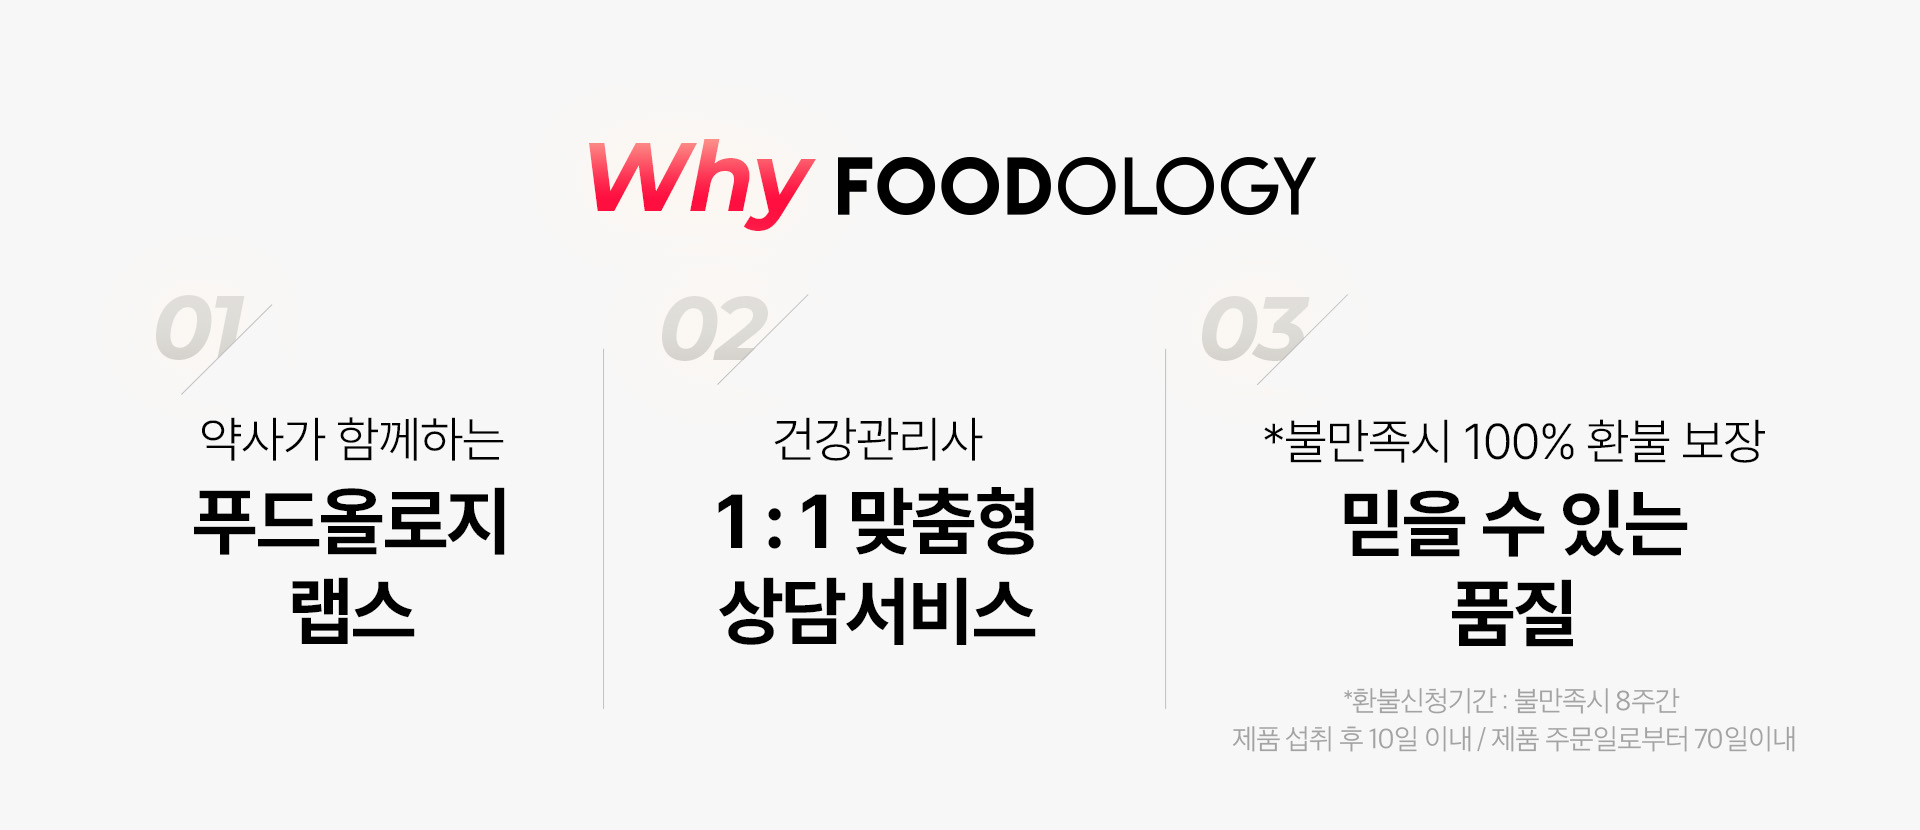 why foodology